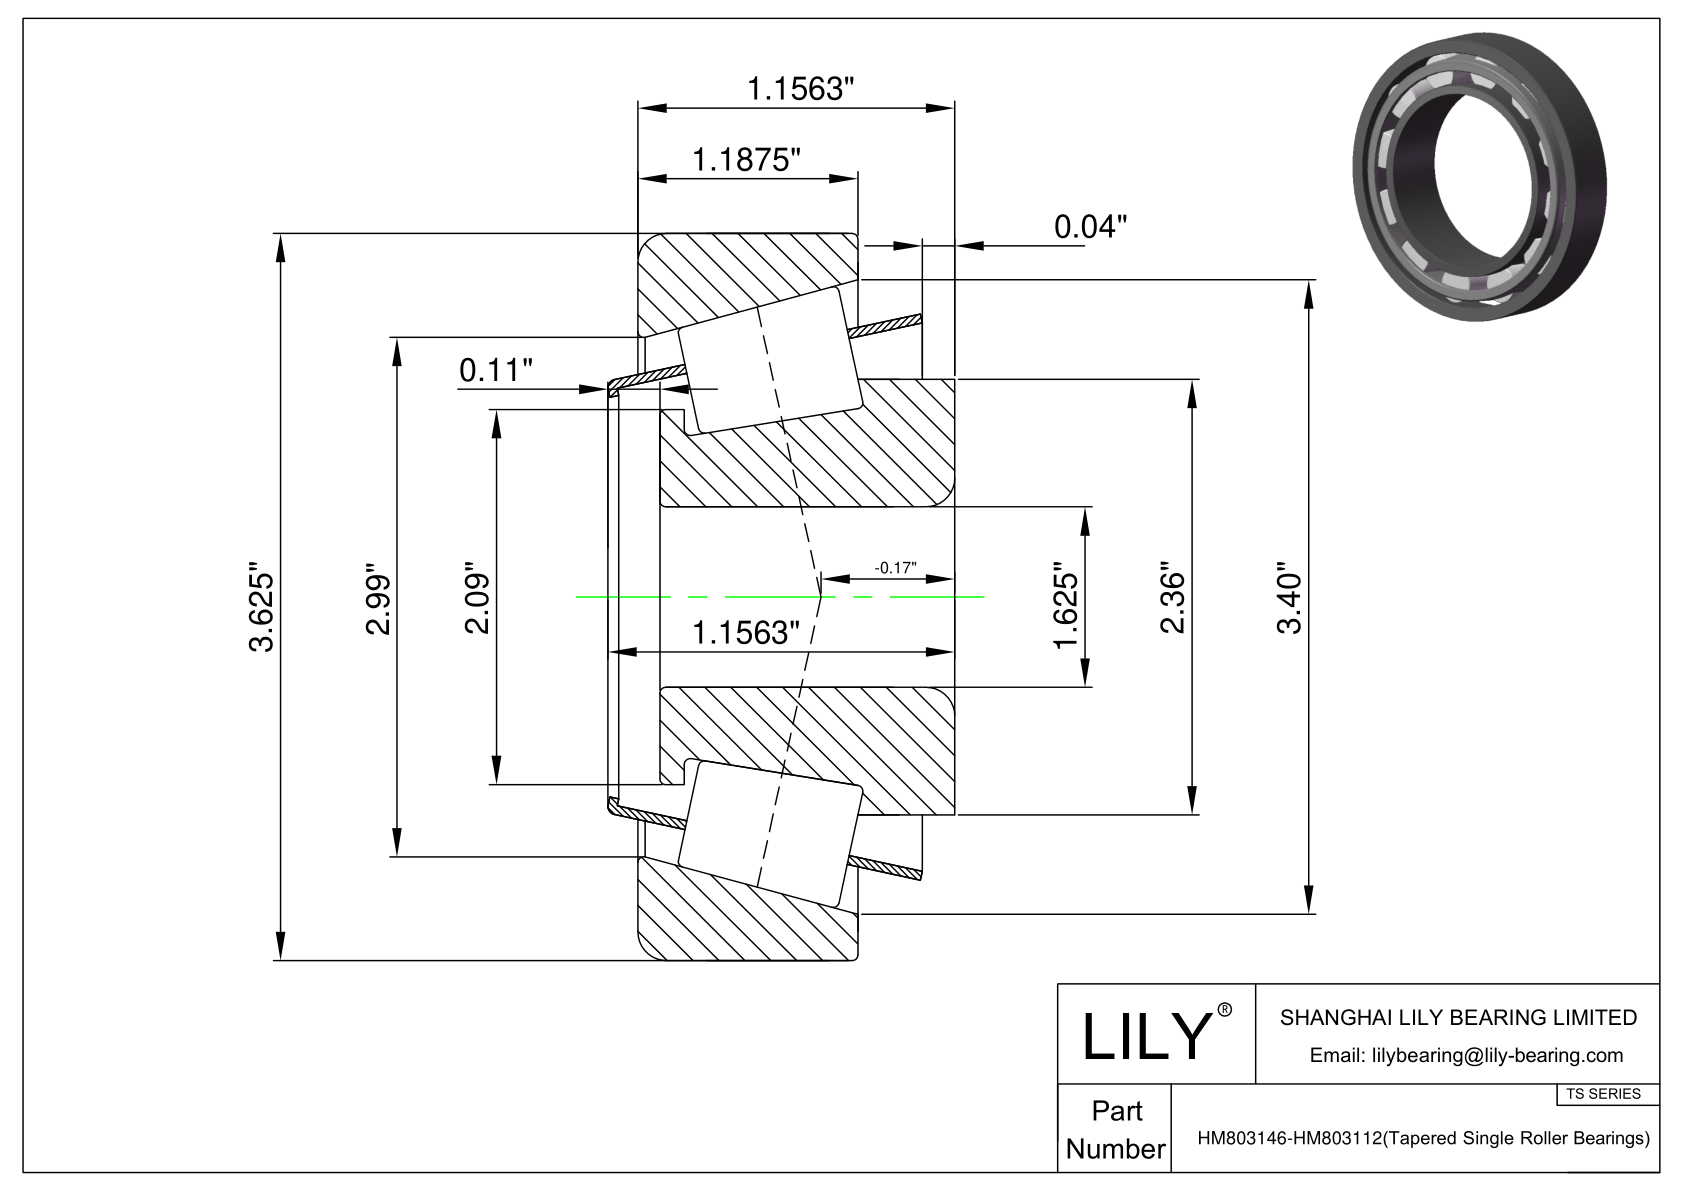 HM803146-HM803112 TS (Tapered Single Roller Bearings) (Imperial) cad drawing